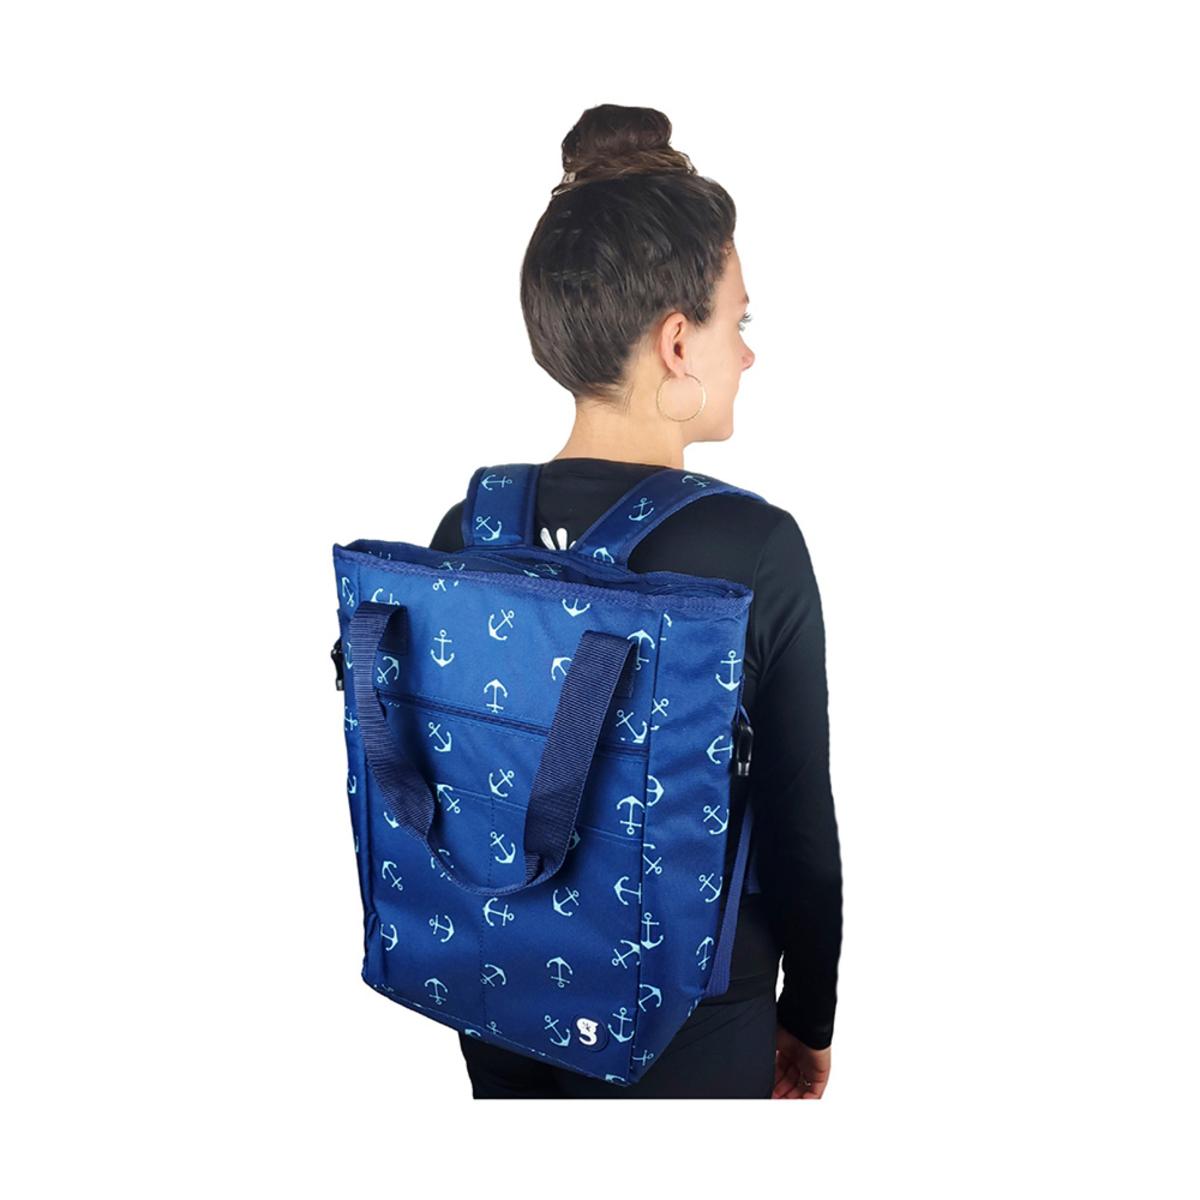 Geckobrands Convertible Tote & Backpack - Anchors